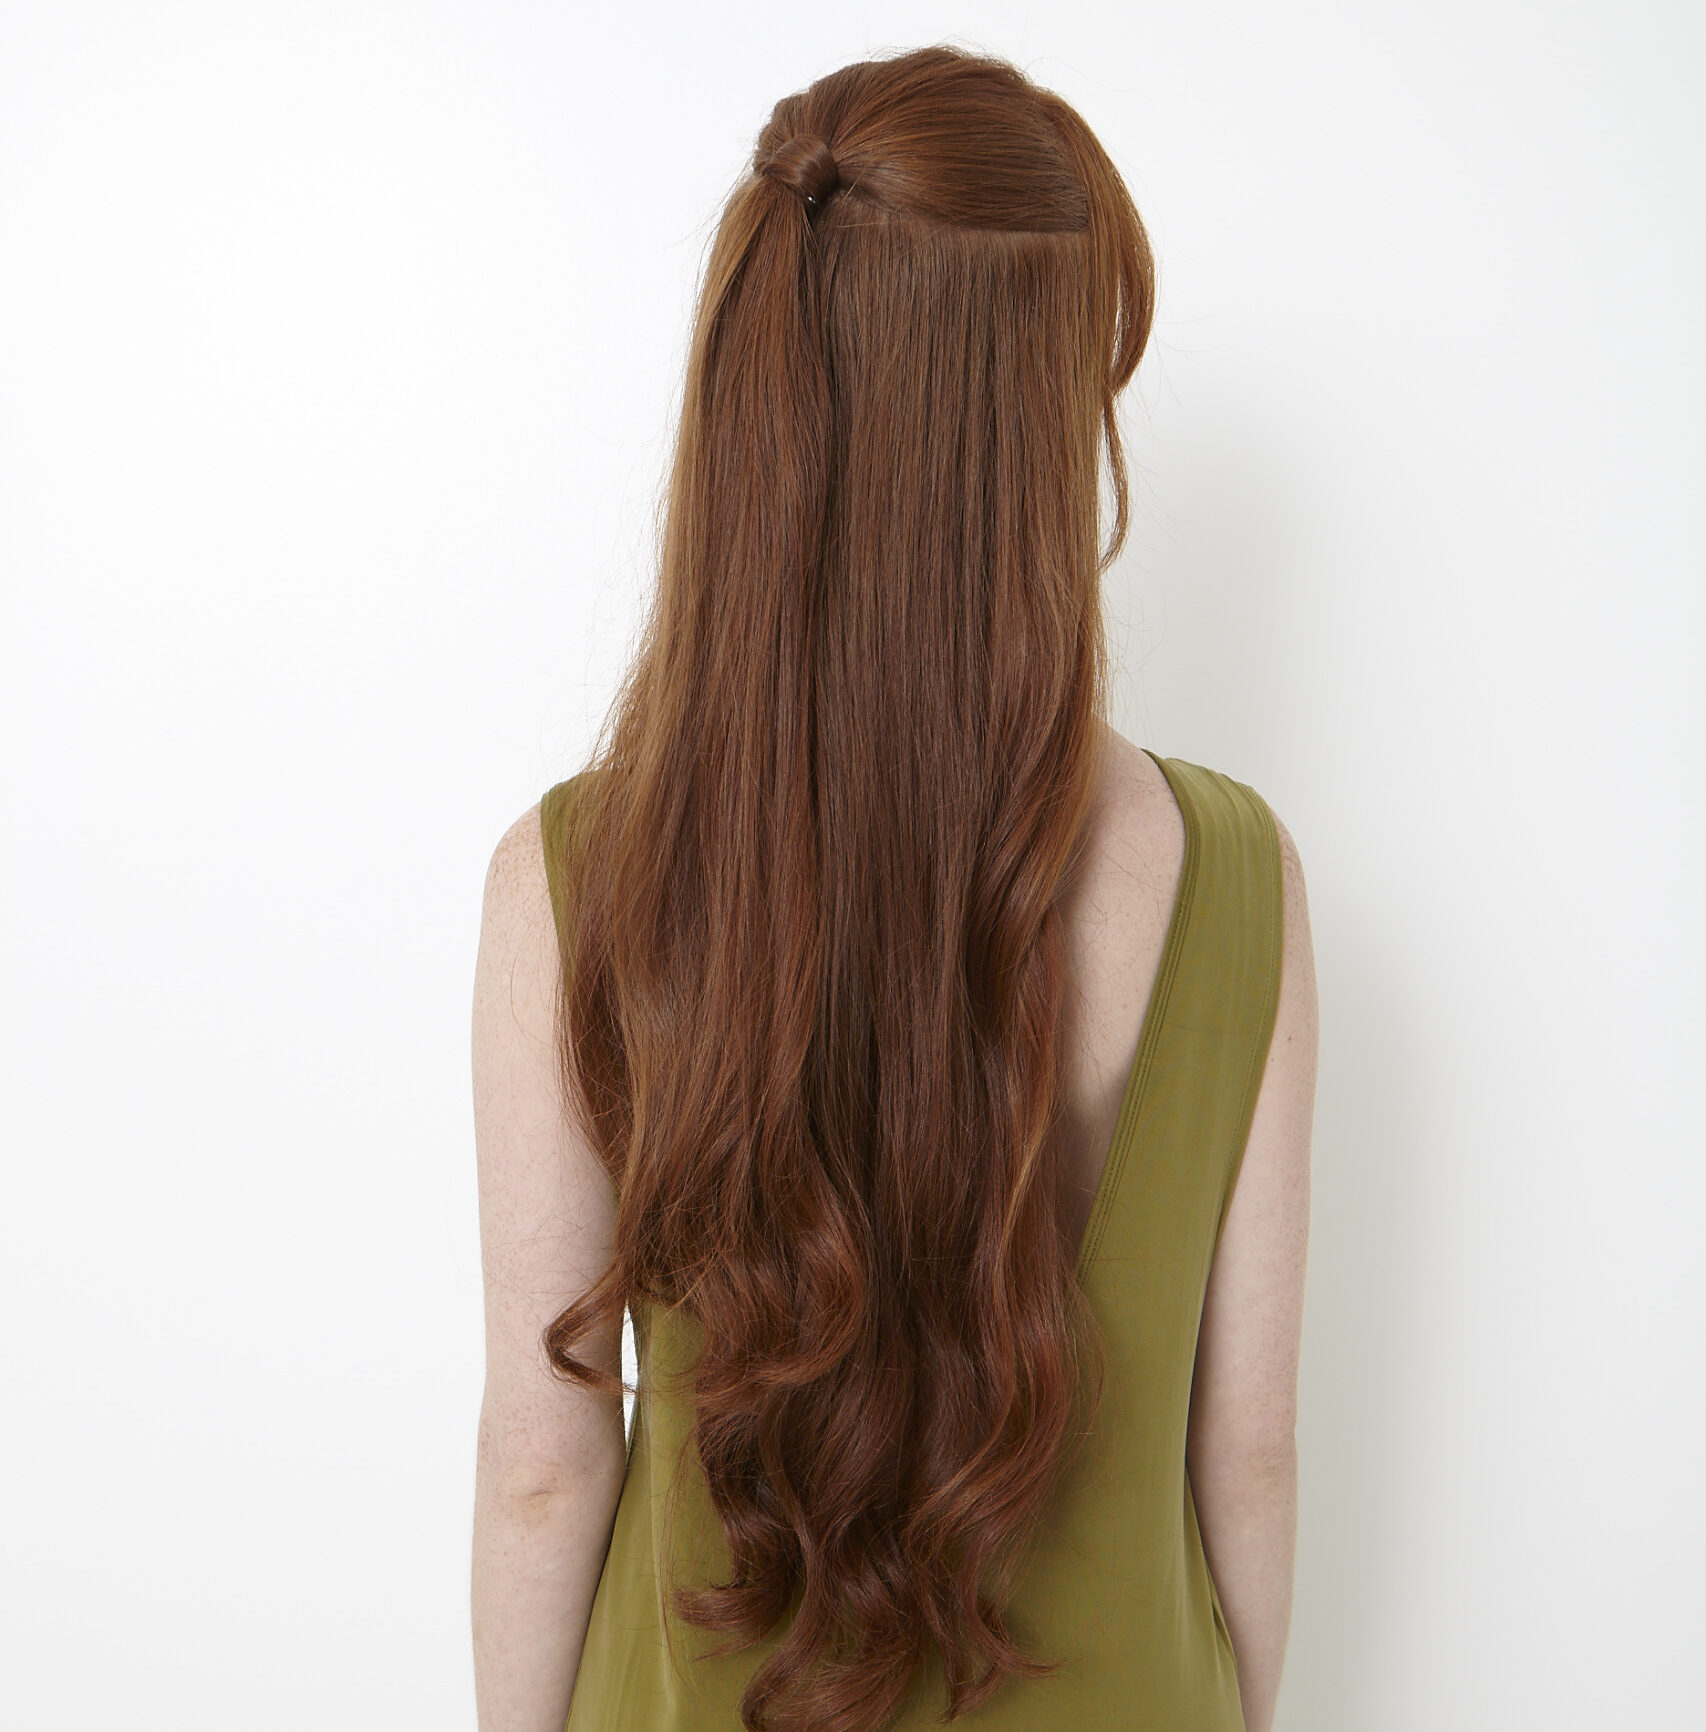 7 Ways To Make Your Red Hair Grow Faster So It’s Longer and Stronger